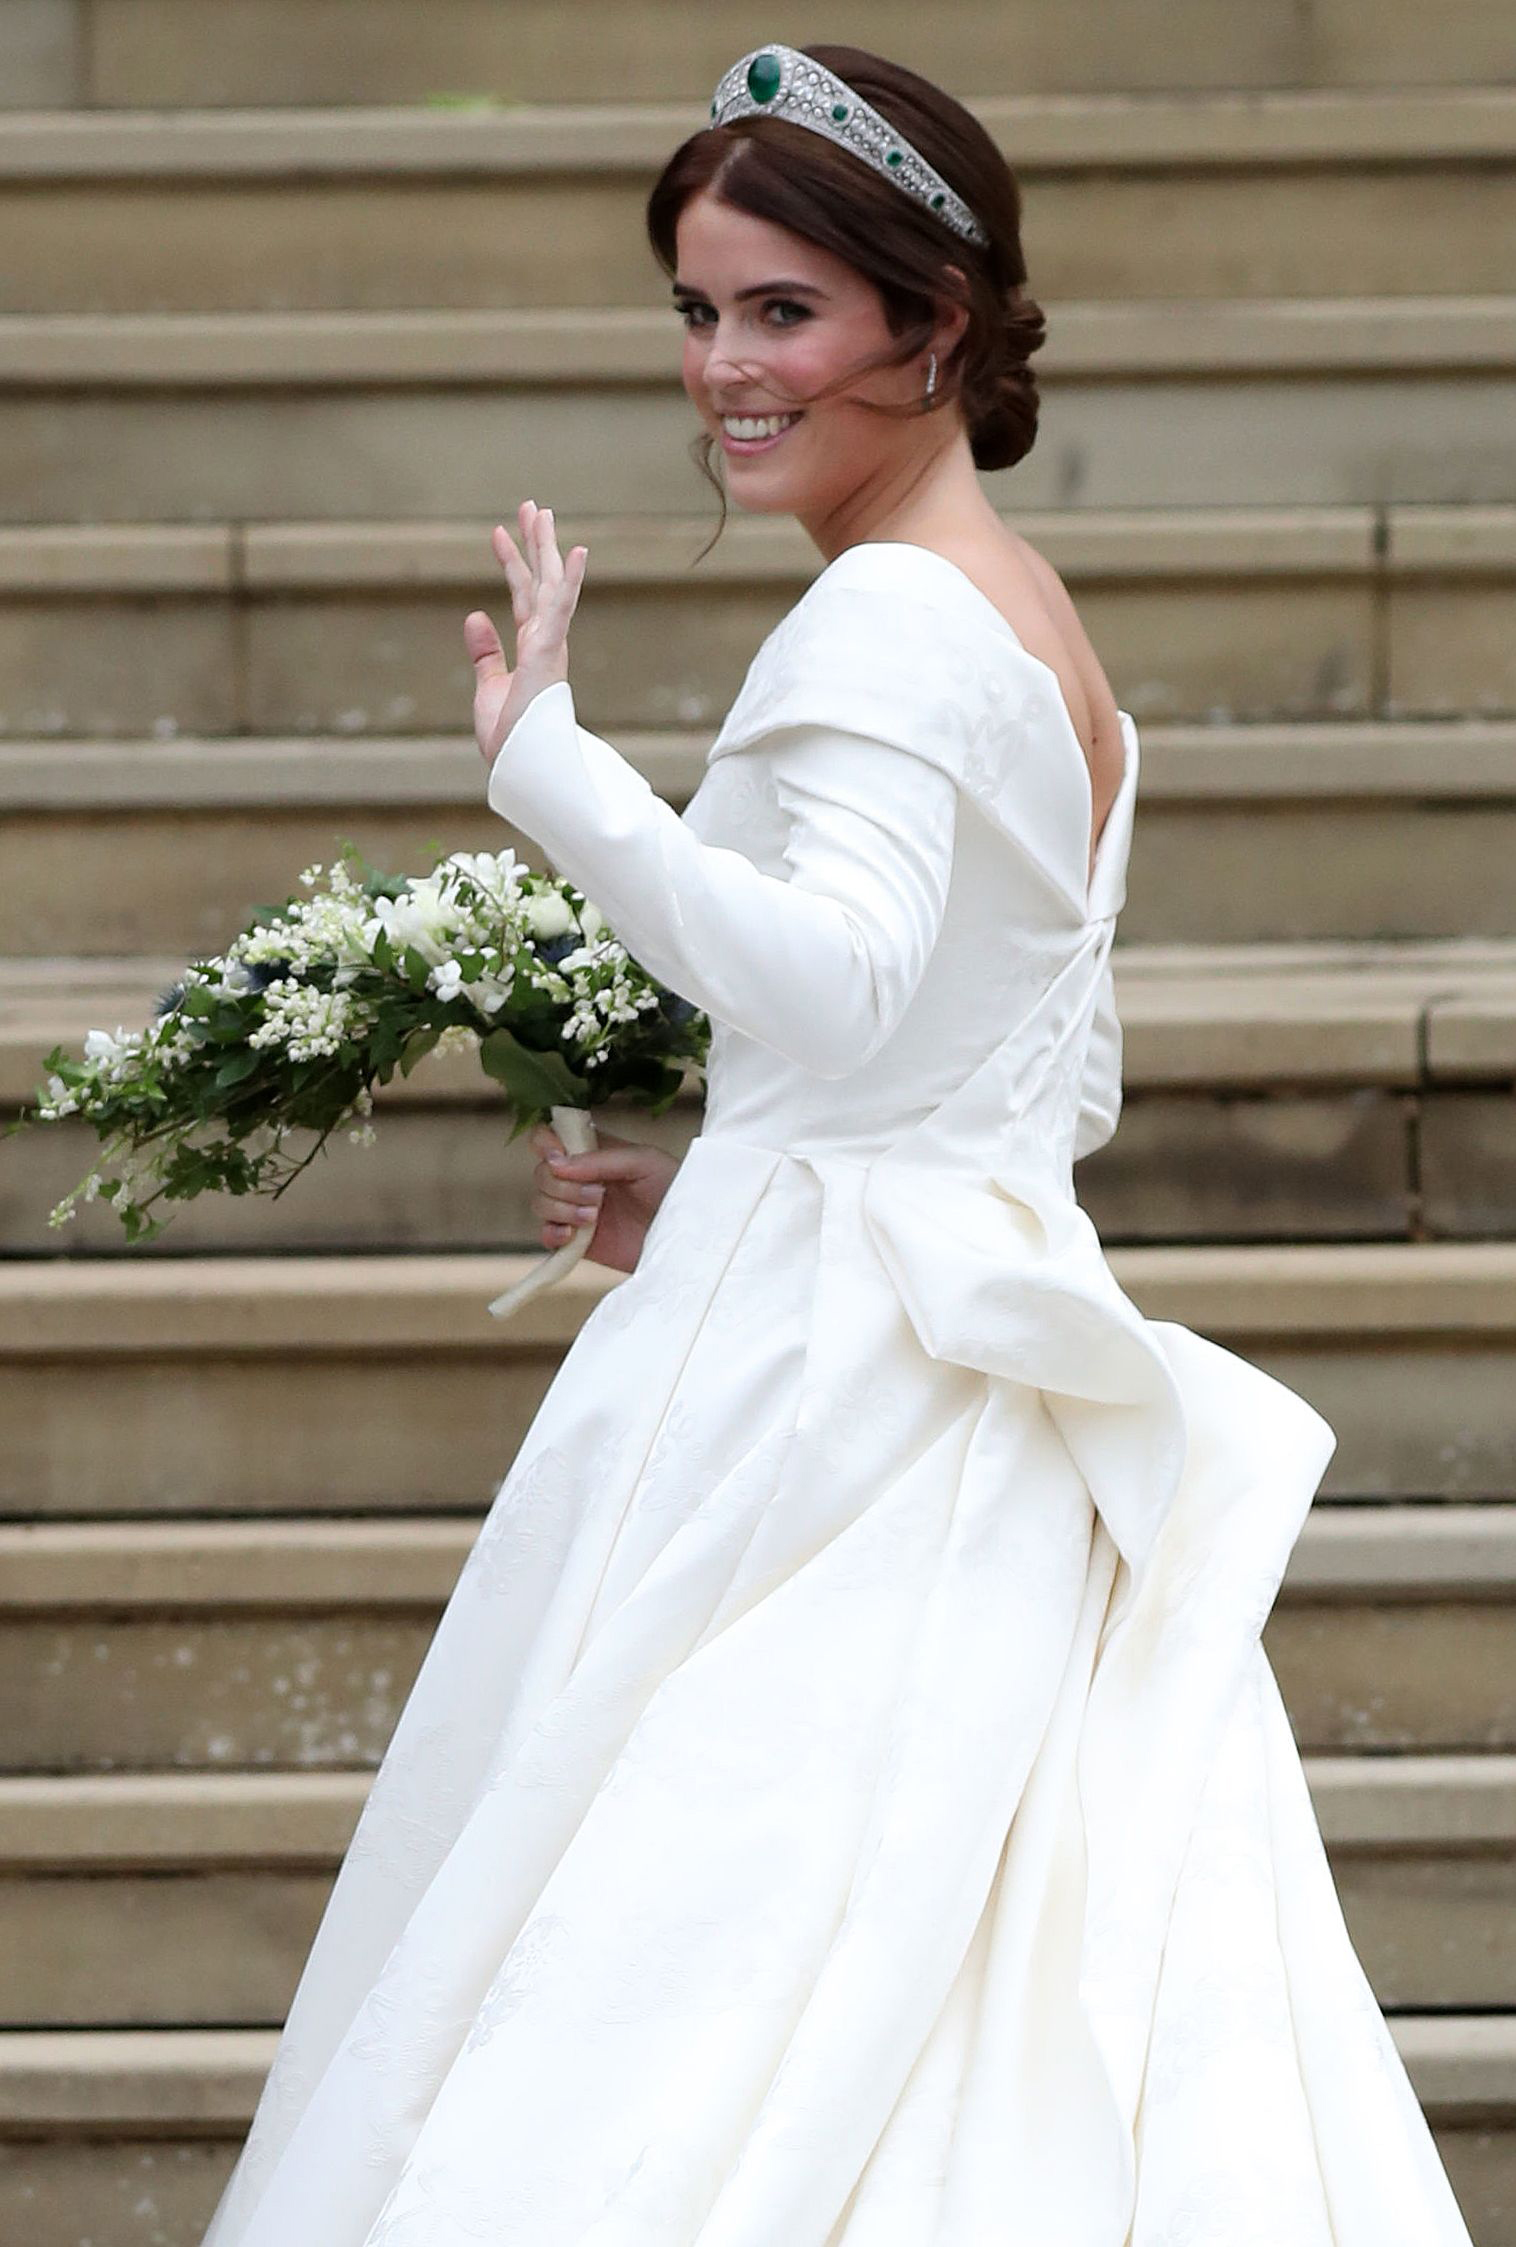 PHOTO: Britain's Princess Eugenie of York at the West Door of St George's Chapel, Windsor Castle, in Windsor, Oct. 12, 2018, for her wedding to Jack Brooksbank.